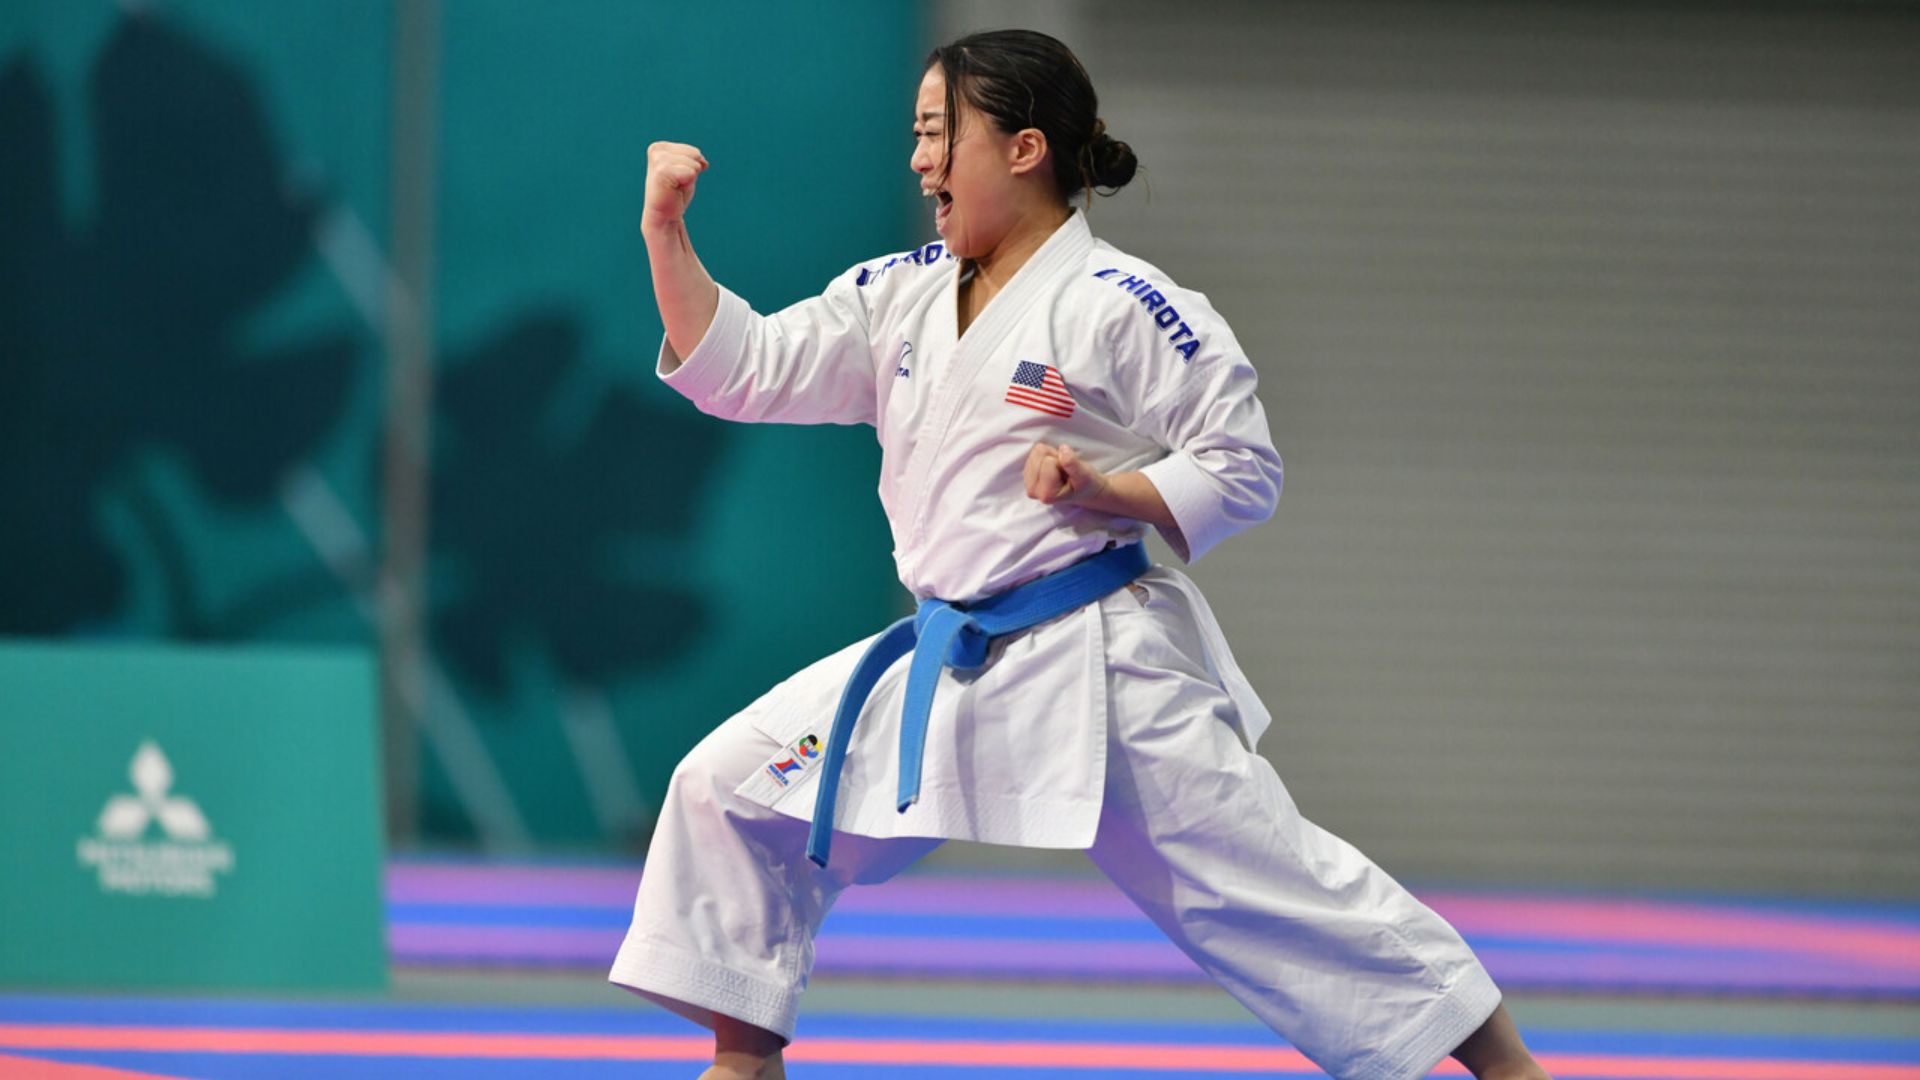 United States aims for two gold medals in Karate